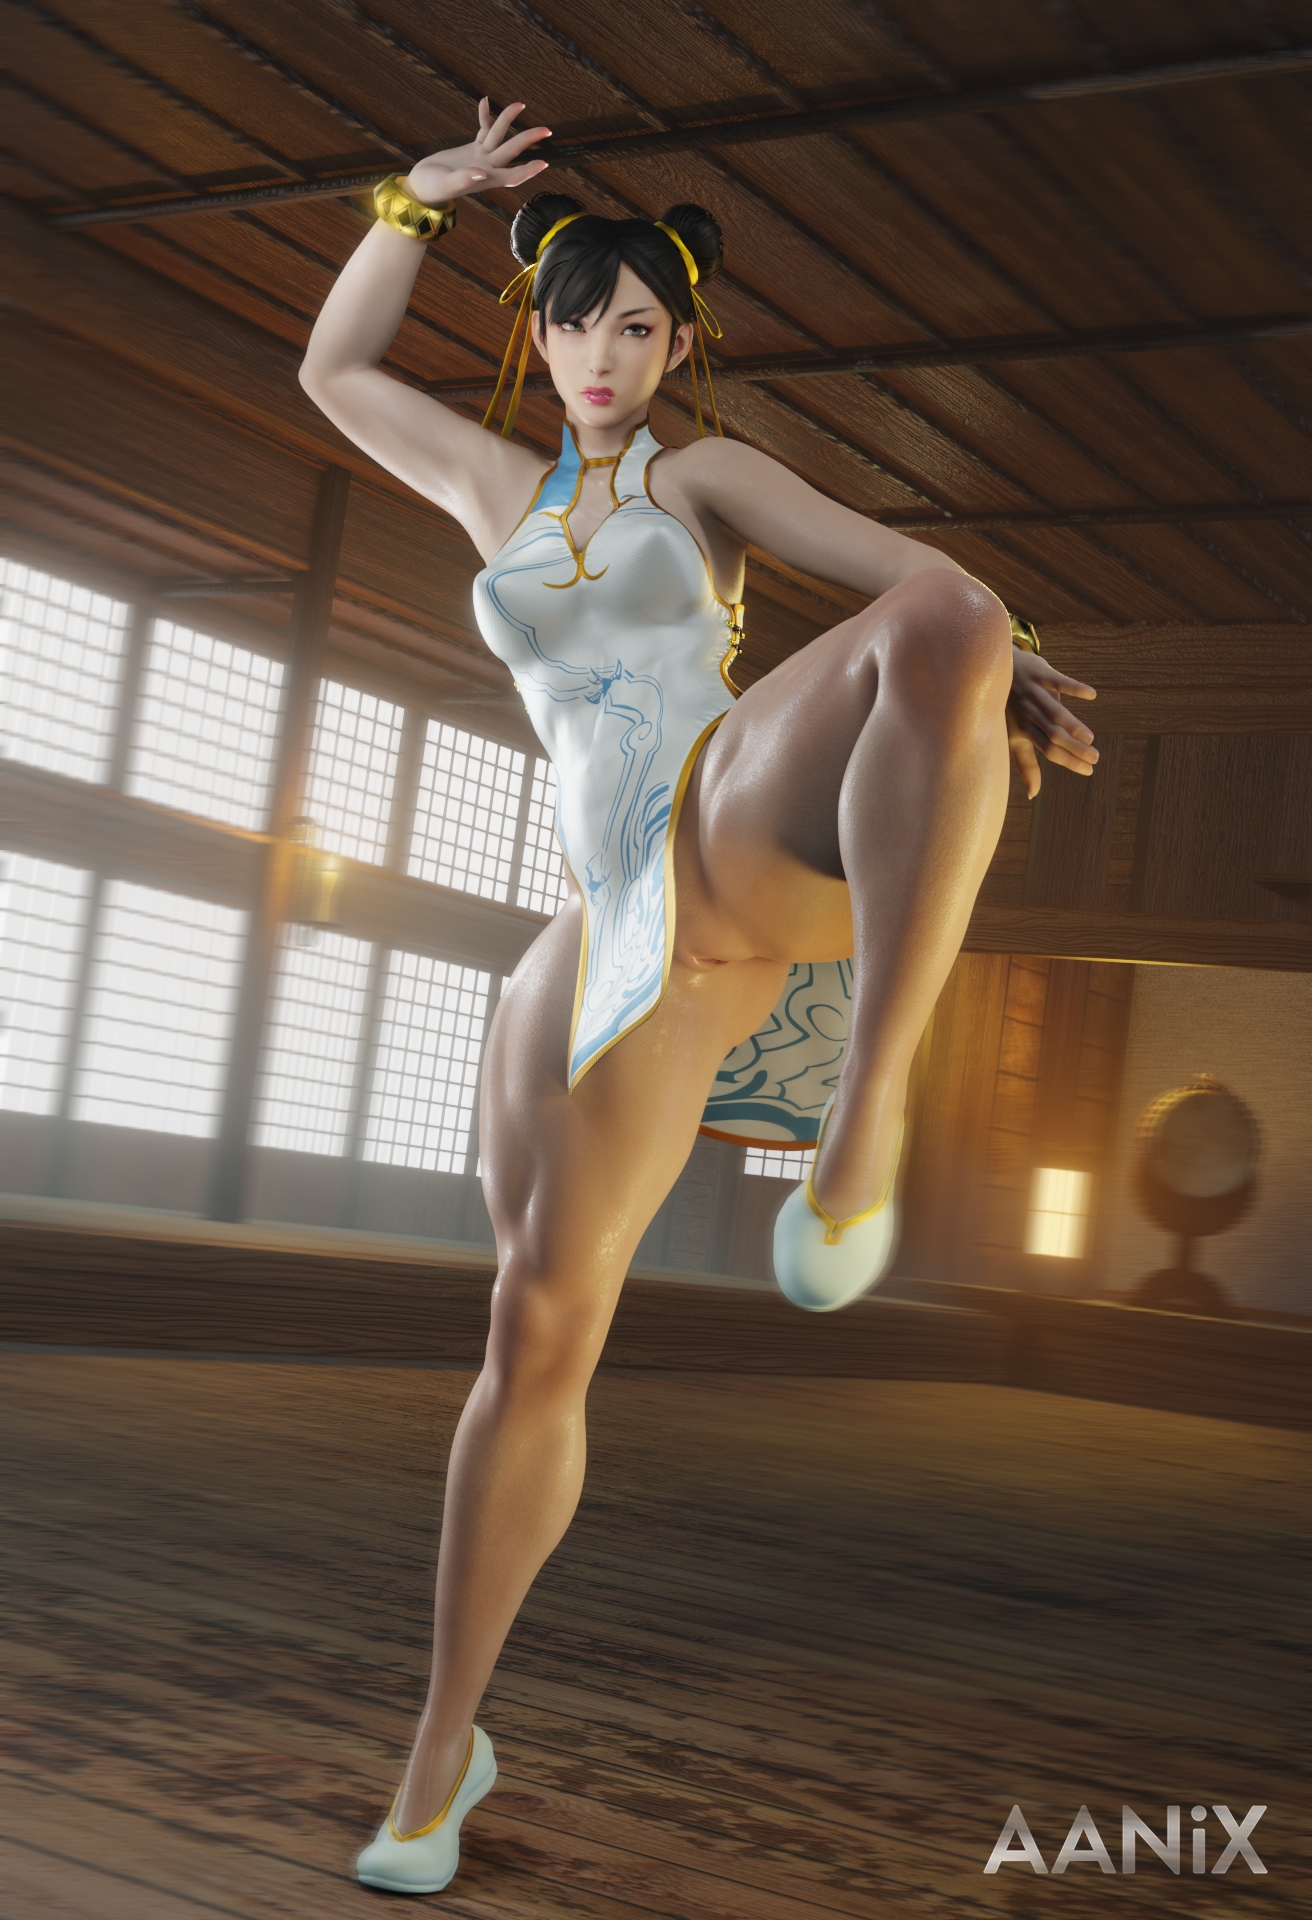 Hue hue hue  I bought her outfit from Wish Chun Li Street Fighter Half Naked Clean Pussy Thick Thighs Medium Breasts Perky Muscular Girl